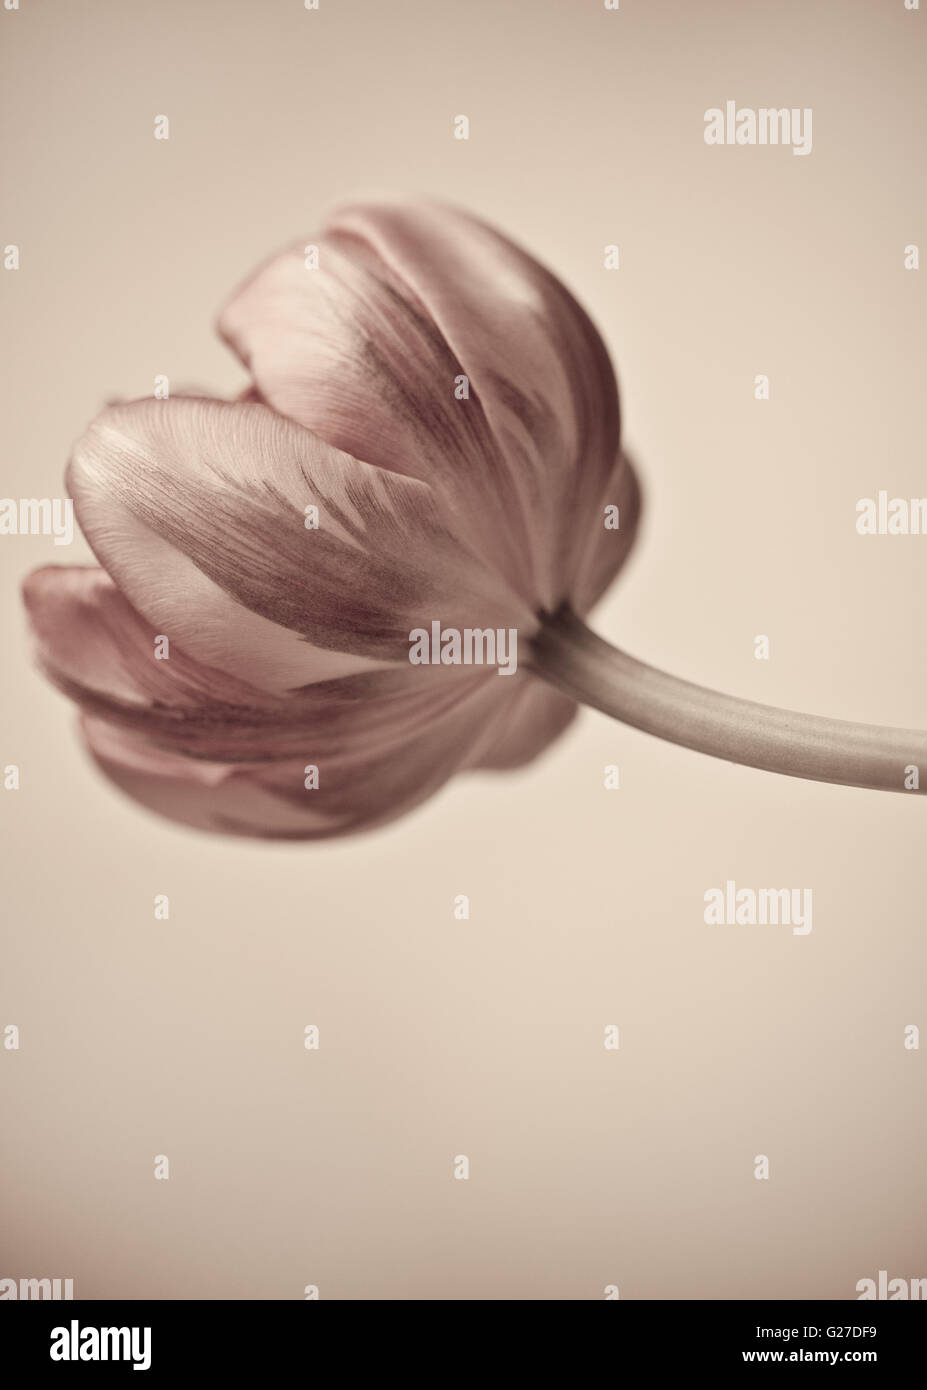 Tulips blossom in retro vintage style editing Stock Photo